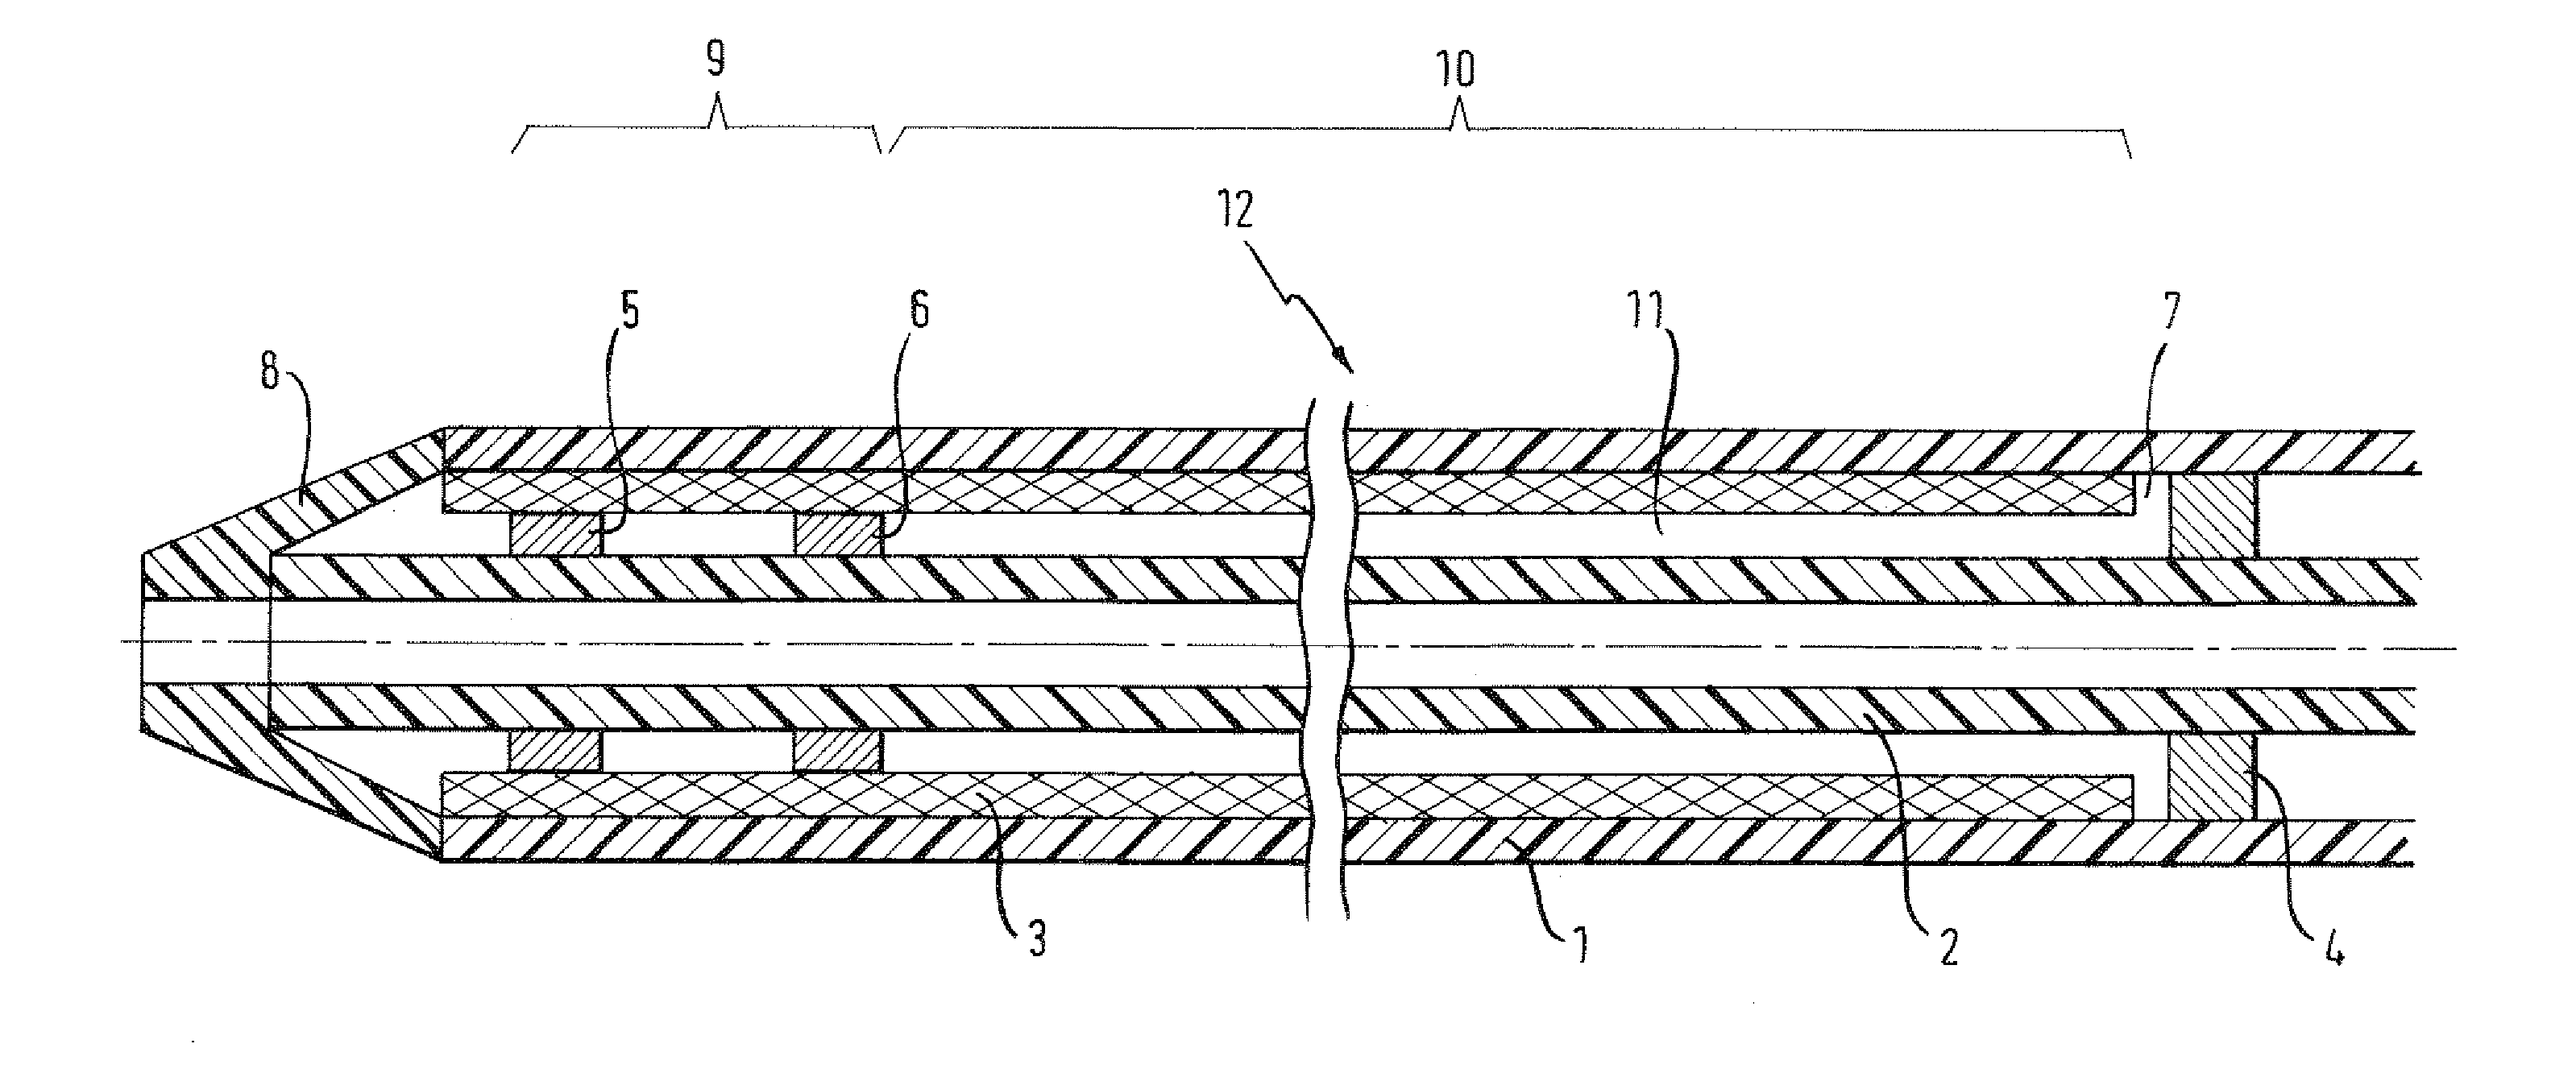 Delivery device for delivering a stent device